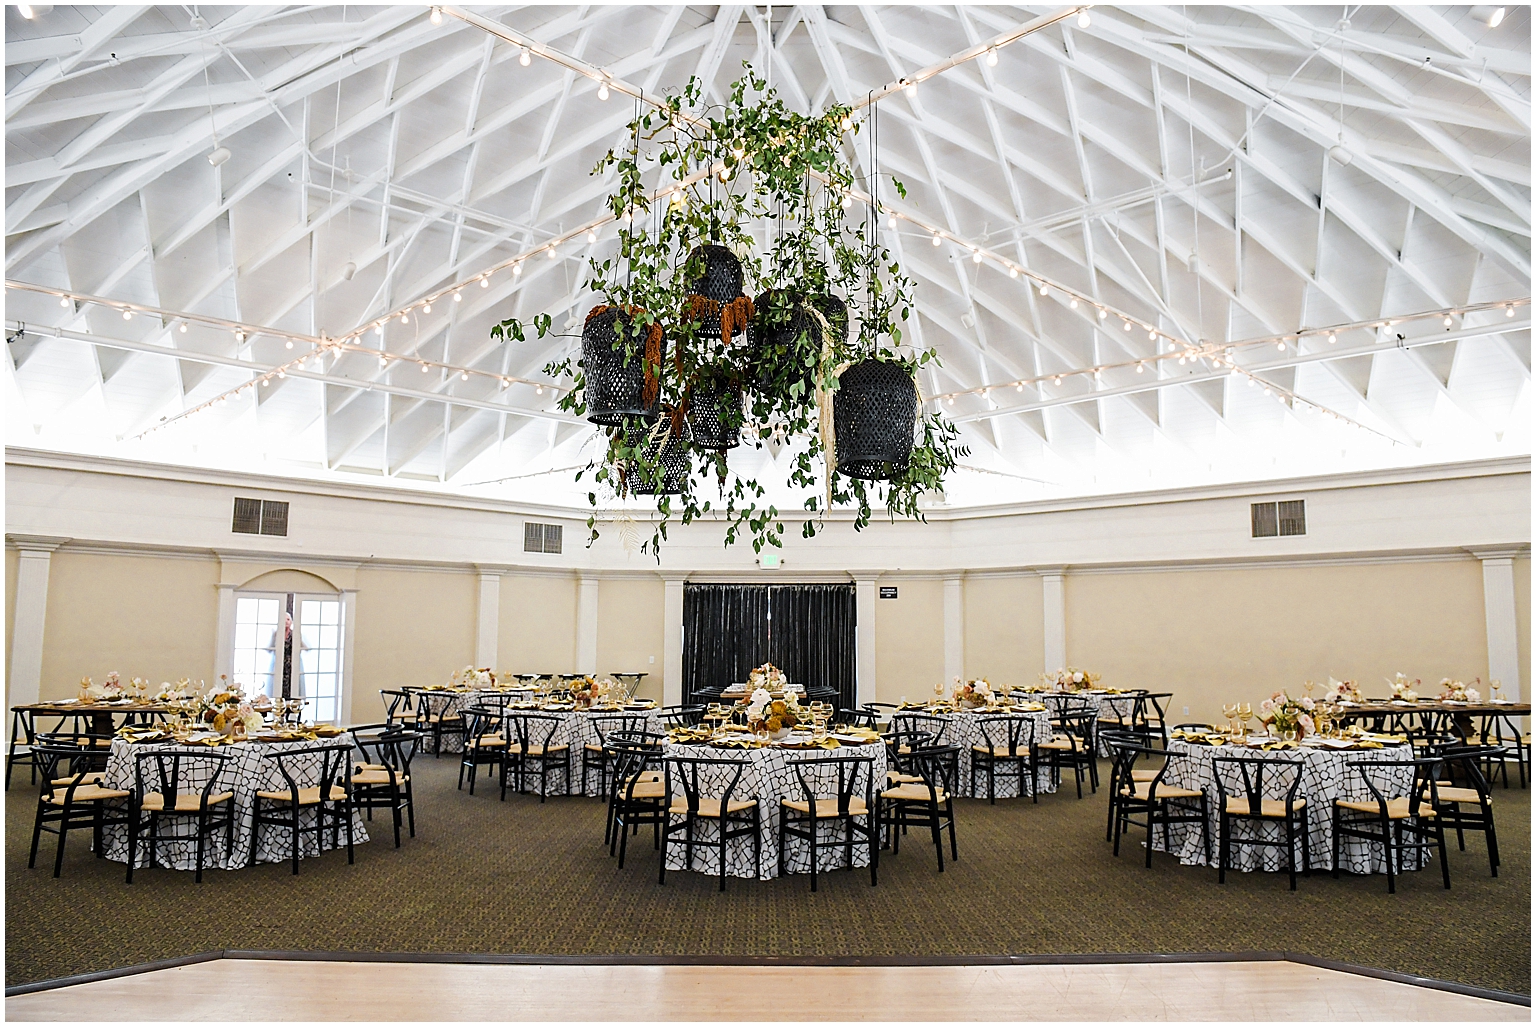 Casino San Clemente ballroom decorated for a wedding reception featuring floral design by studio la Palma and event design by Michelle Garibay Events